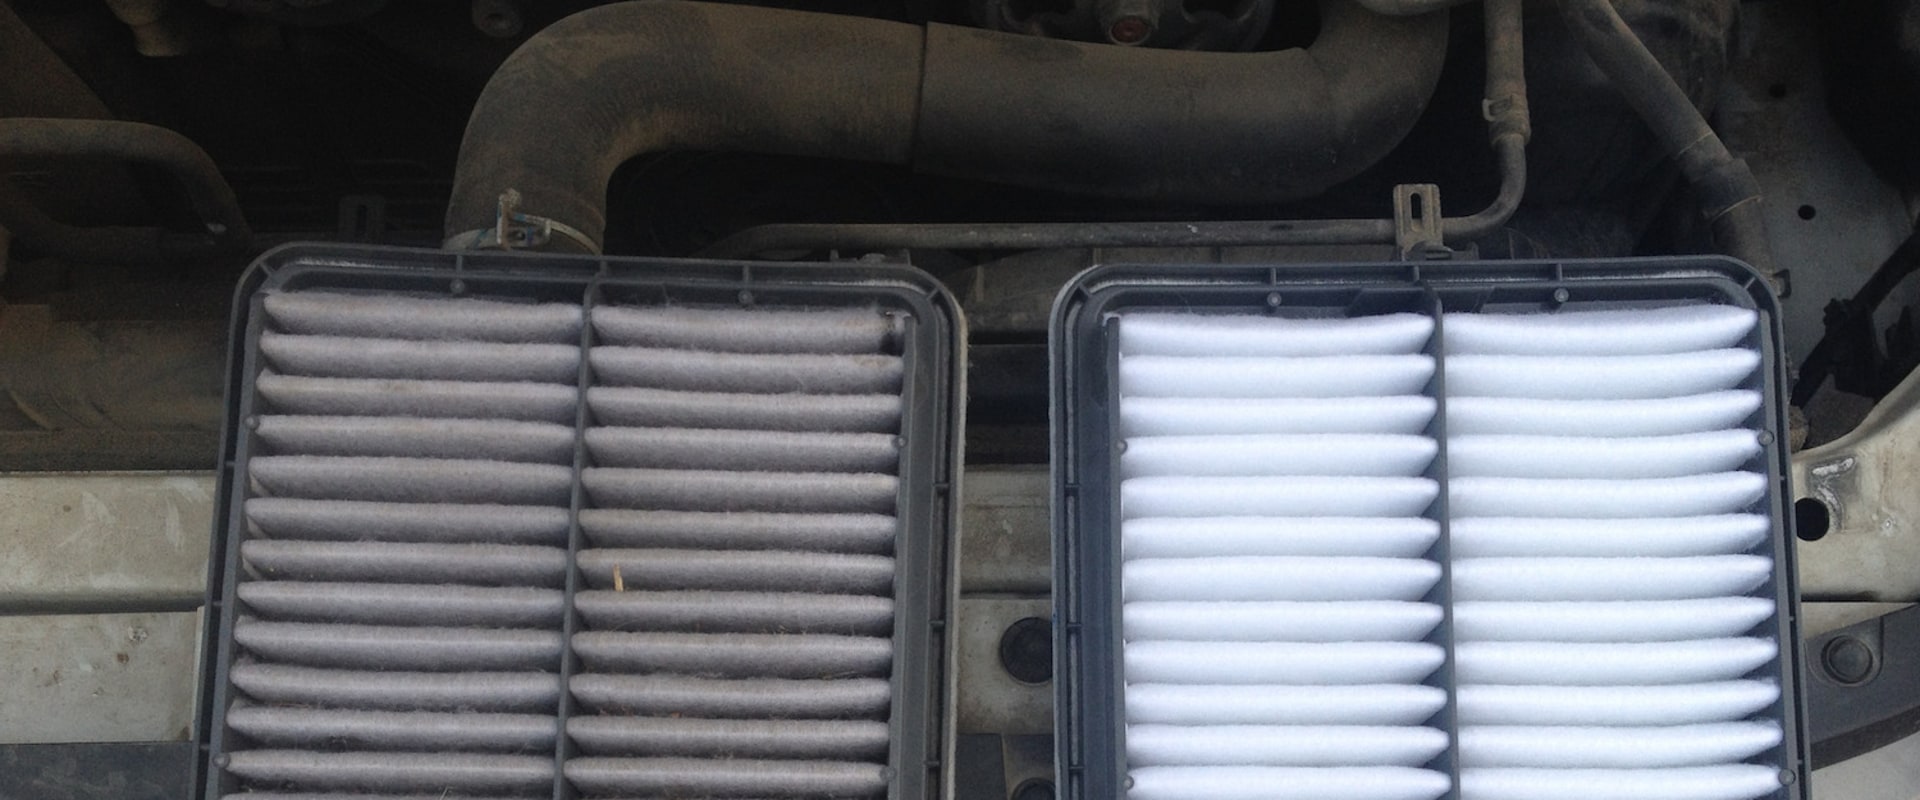 How dirty is too dirty air filter?